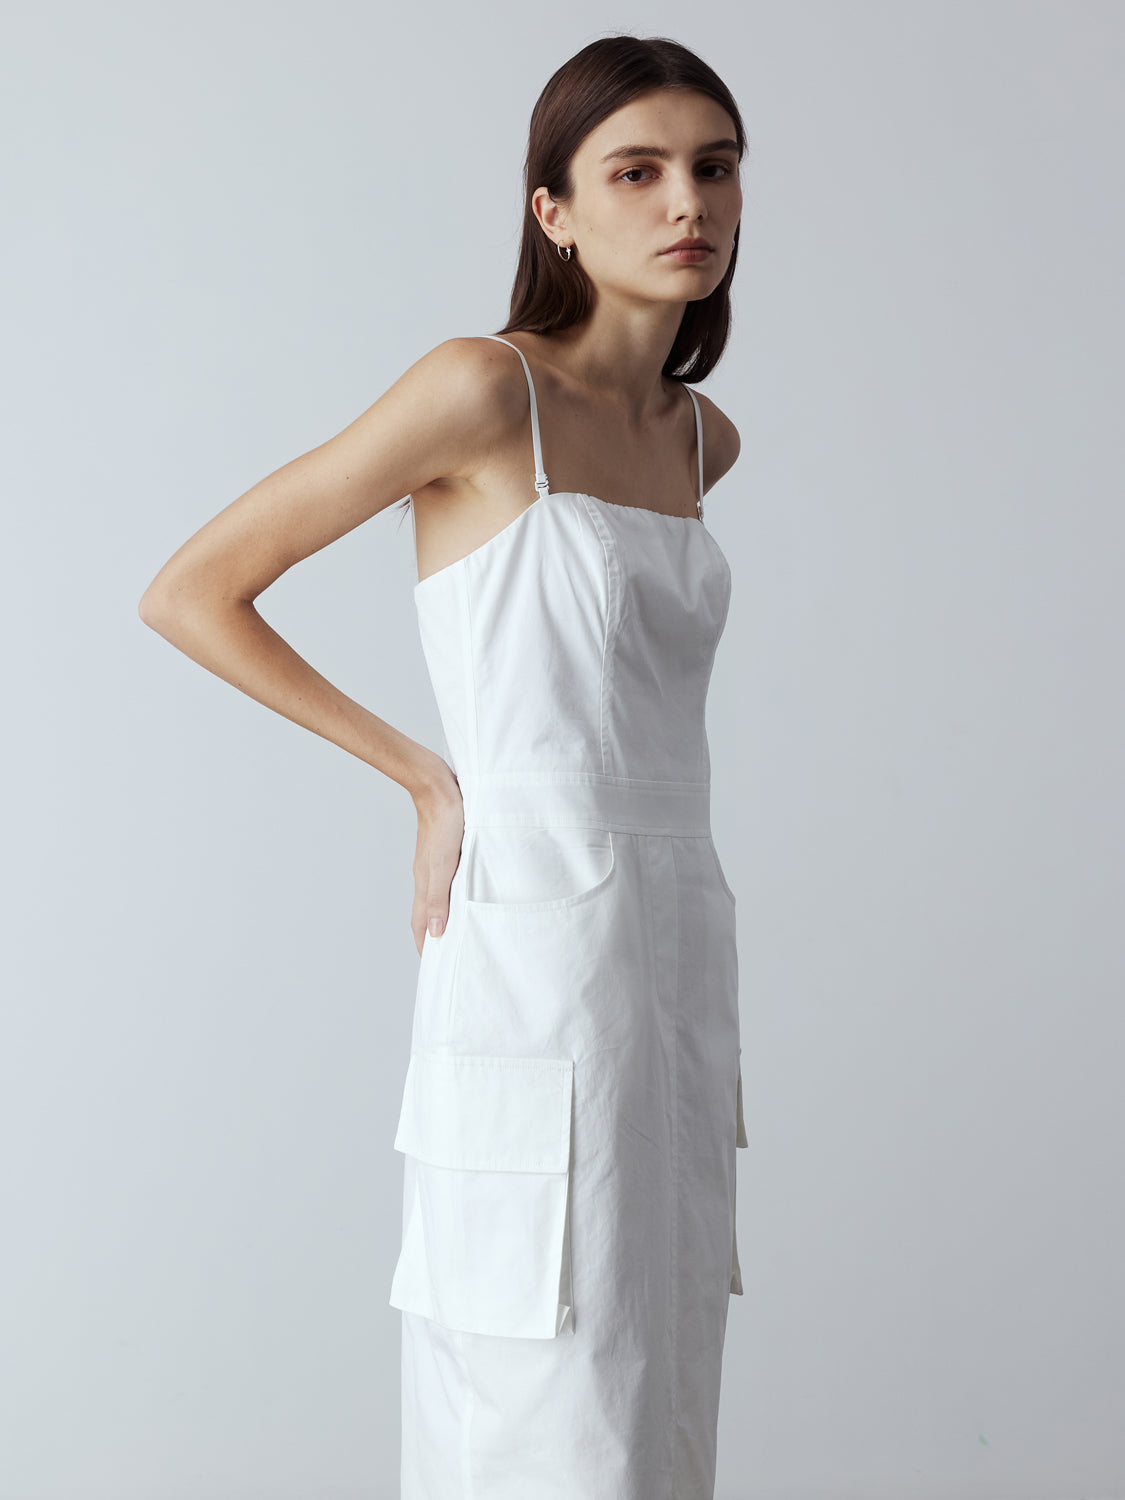 white : Model is wearing the Adjustable Cargo Dress in White, which comes with back pockets, and cargo and slash pockets at the sides. This is a sleeveless garment with spaghetti straps. Can also be worn as a tube dress. Worn with silver heels.